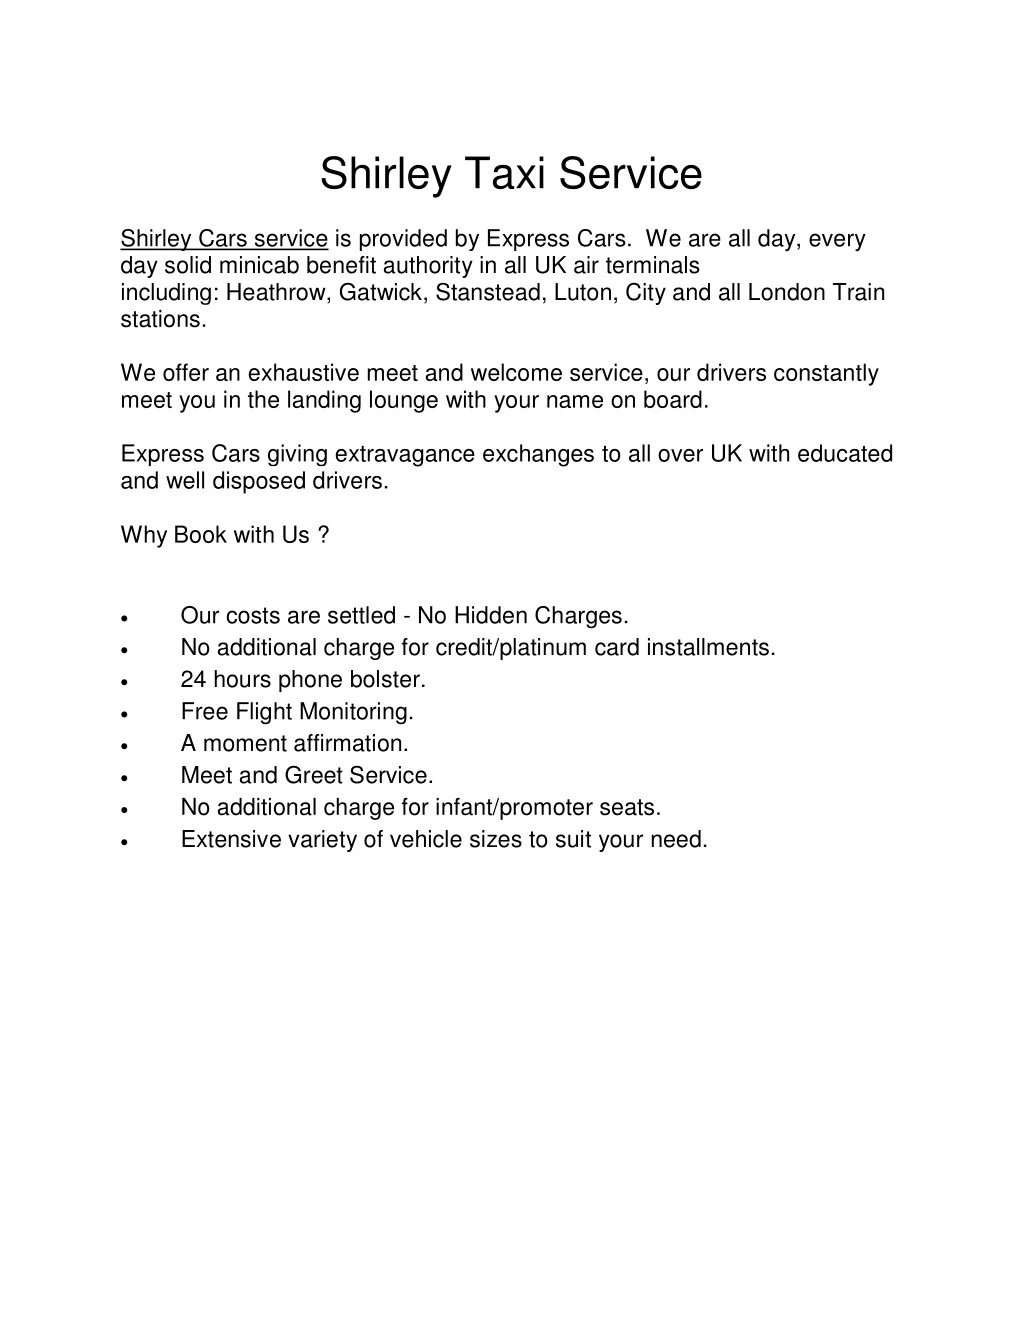 shirley taxi service